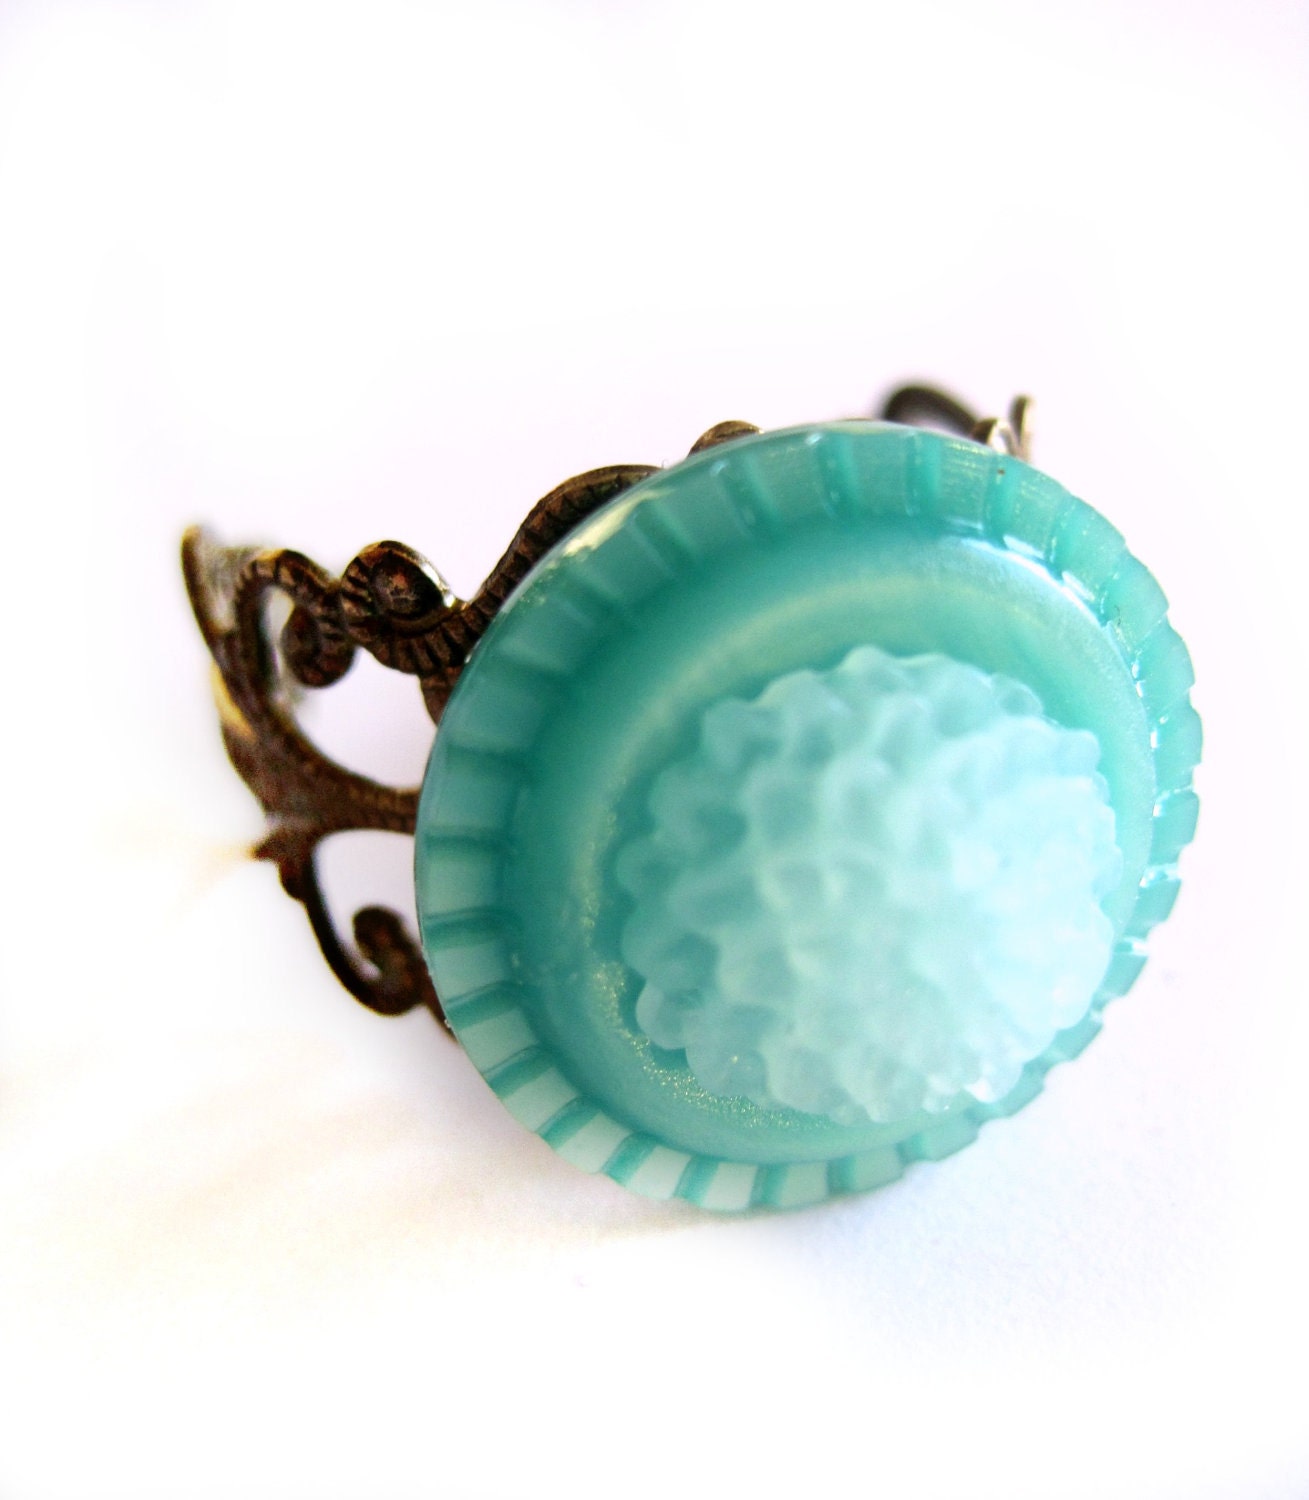 Turquoise ring - Aqua, blue, green - Vintage button ring, button jewelry, Flower ring, chrysanthemum cabochon - filigree, brass band